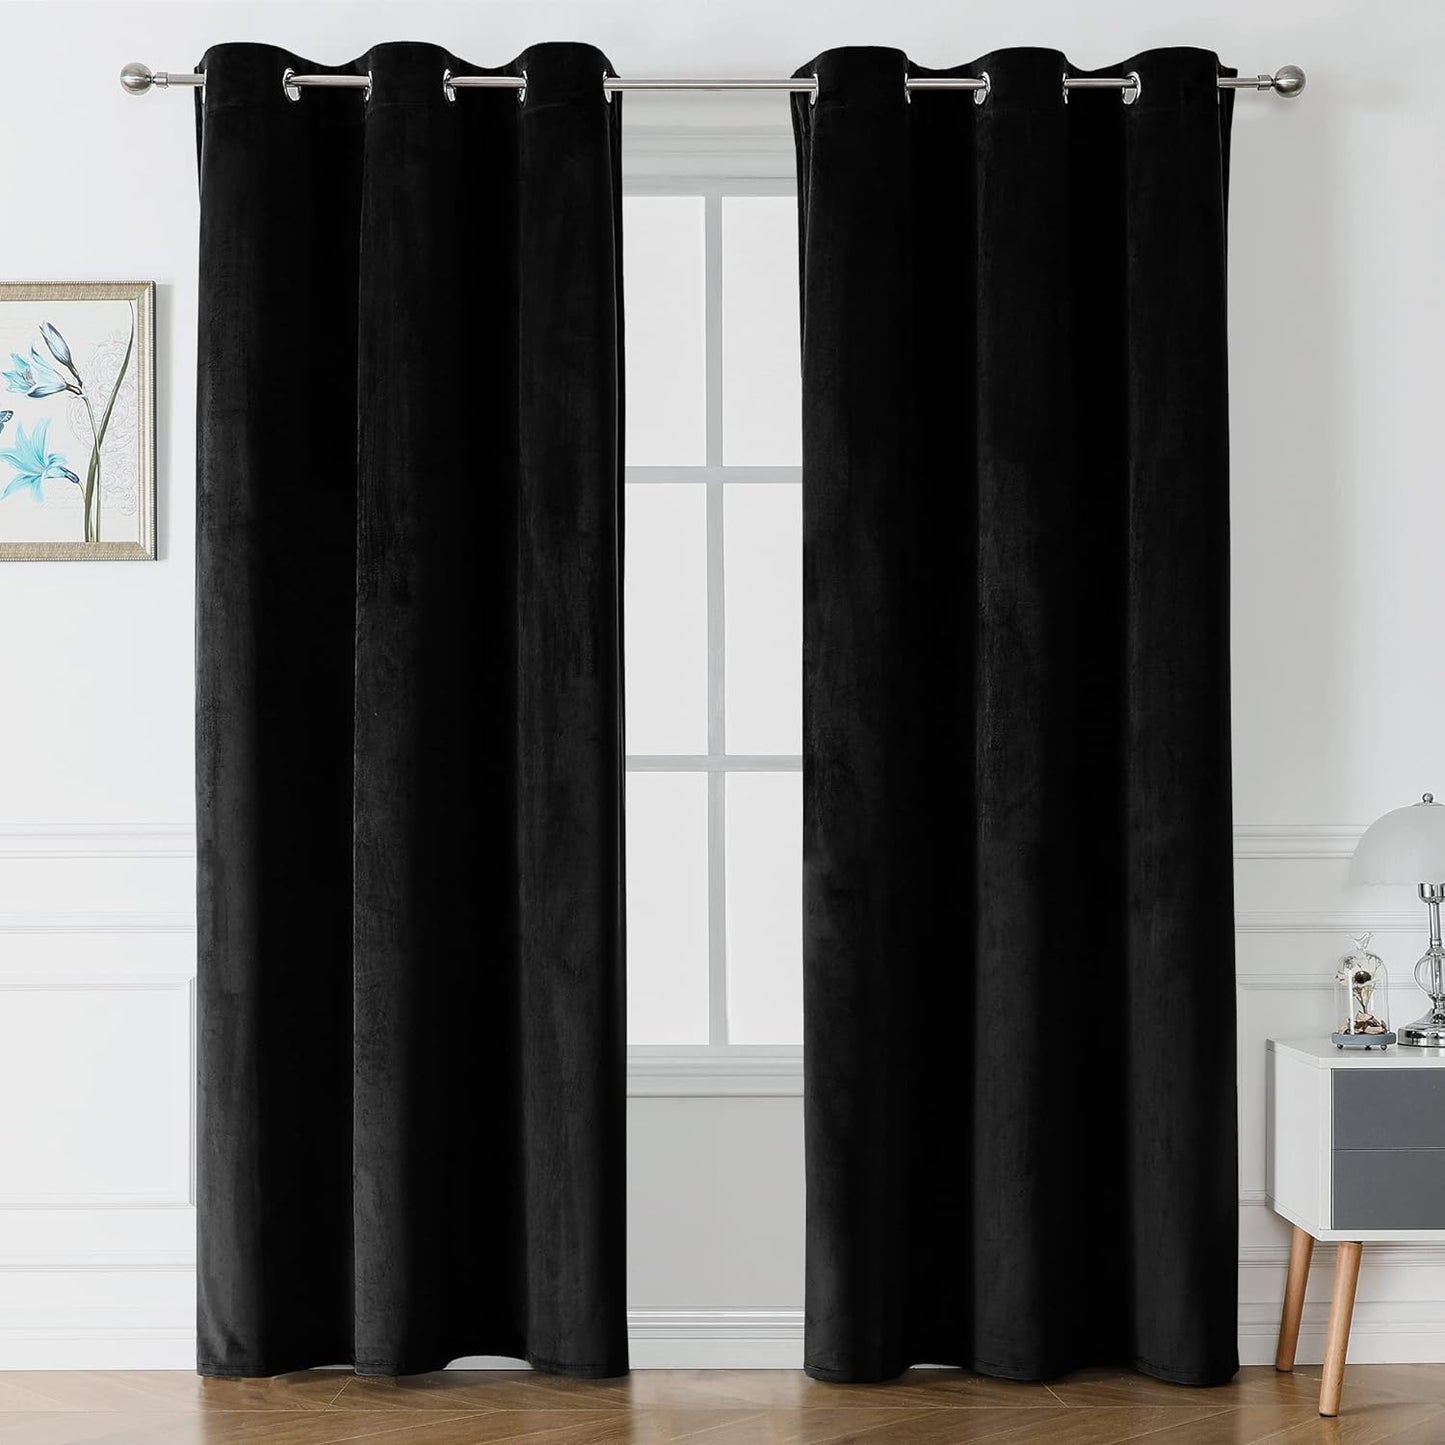 Victree Velvet Curtains for Bedroom, Blackout Curtains 52 X 84 Inch Length - Room Darkening Sun Light Blocking Grommet Window Drapes for Living Room, 2 Panels, Navy  Victree Black 42 X 72 Inches 